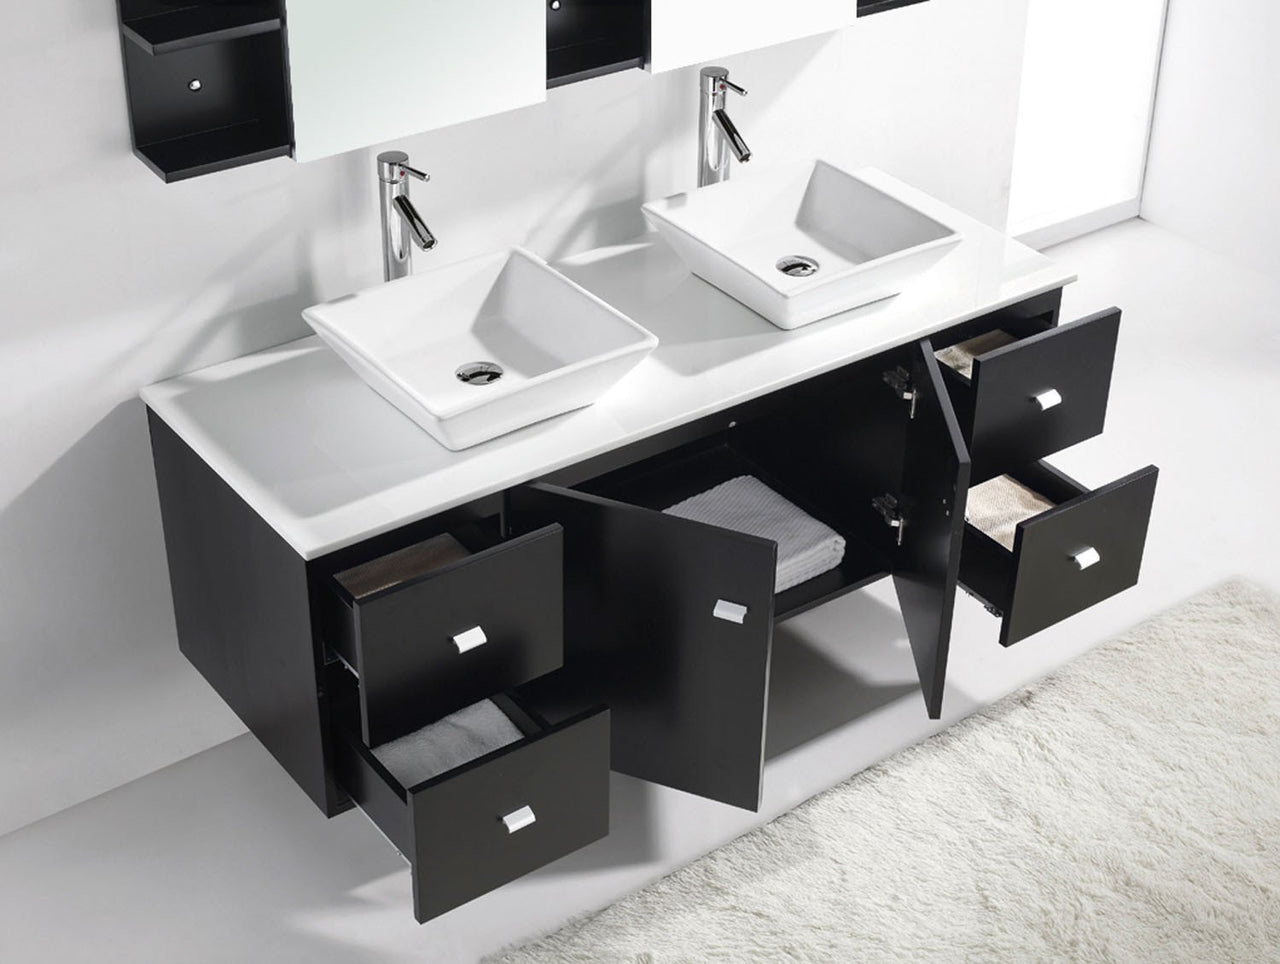 Virtu USA Clarissa 61" Double Square Sink Espresso Top Vanity in Espresso with Polished Chrome Faucet and Mirrors Vanity Virtu USA 